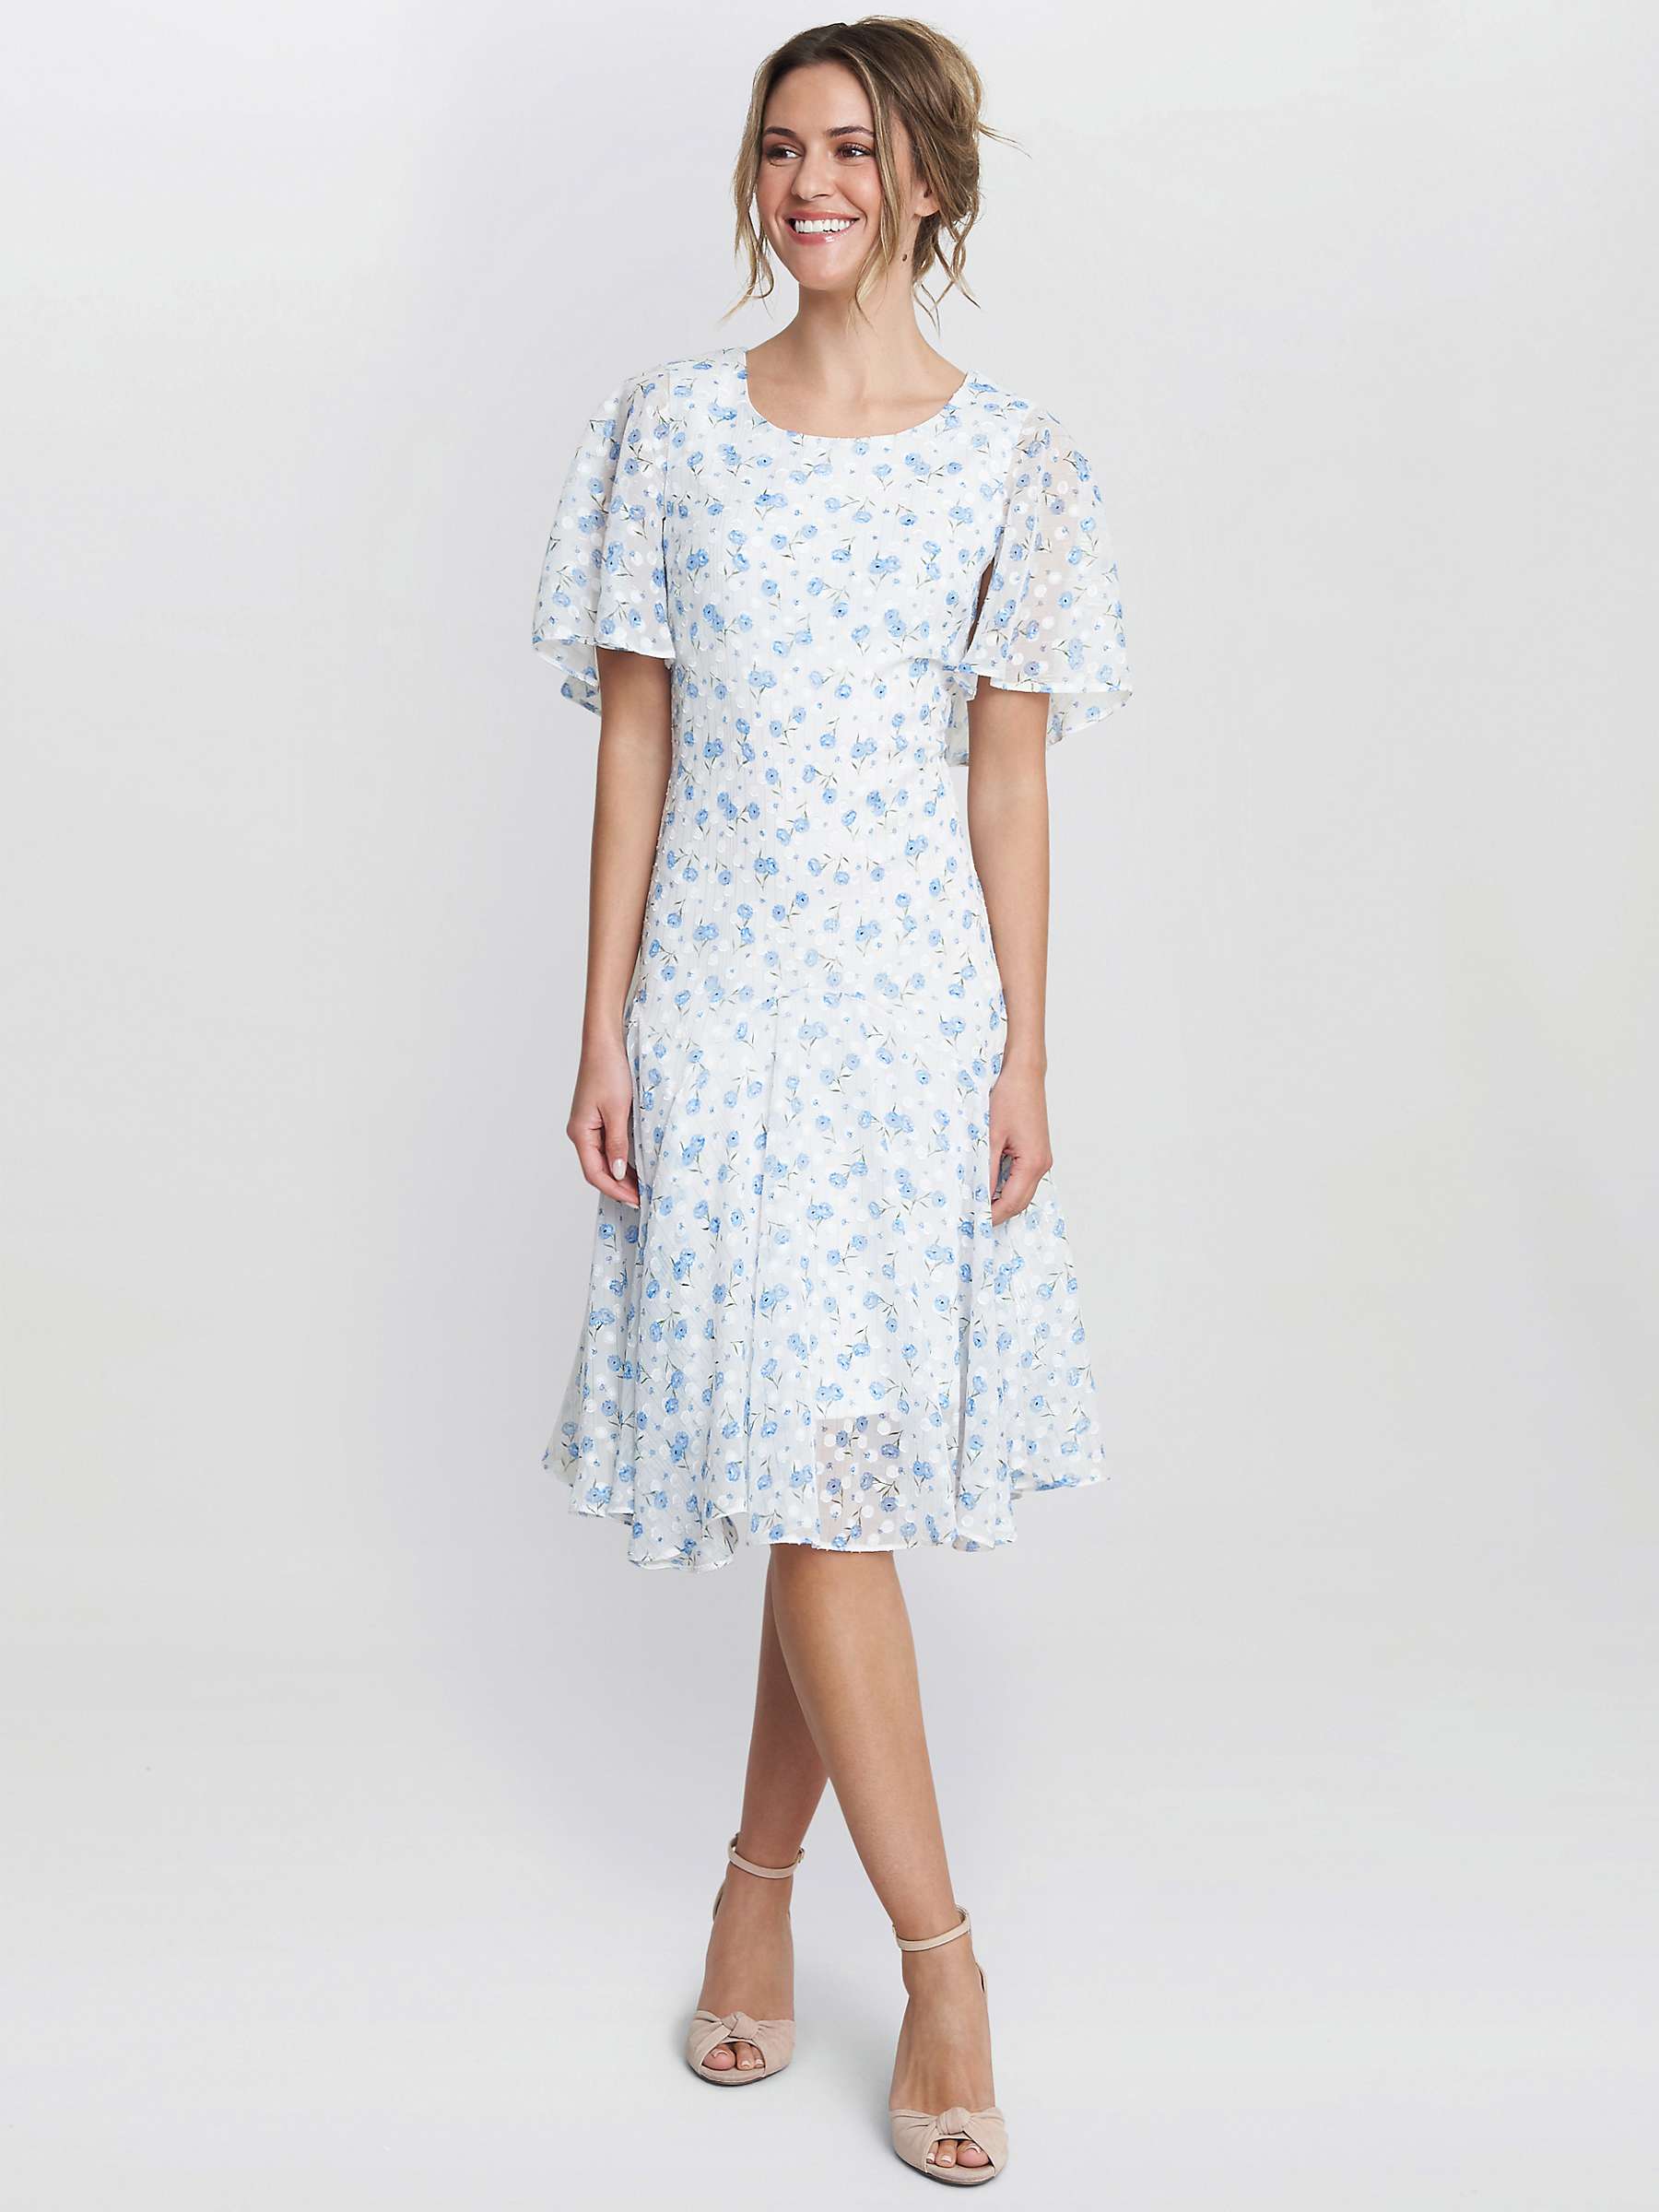 Buy Gina Bacconi Annette Chiffon Knee Length, Blue/White Online at johnlewis.com